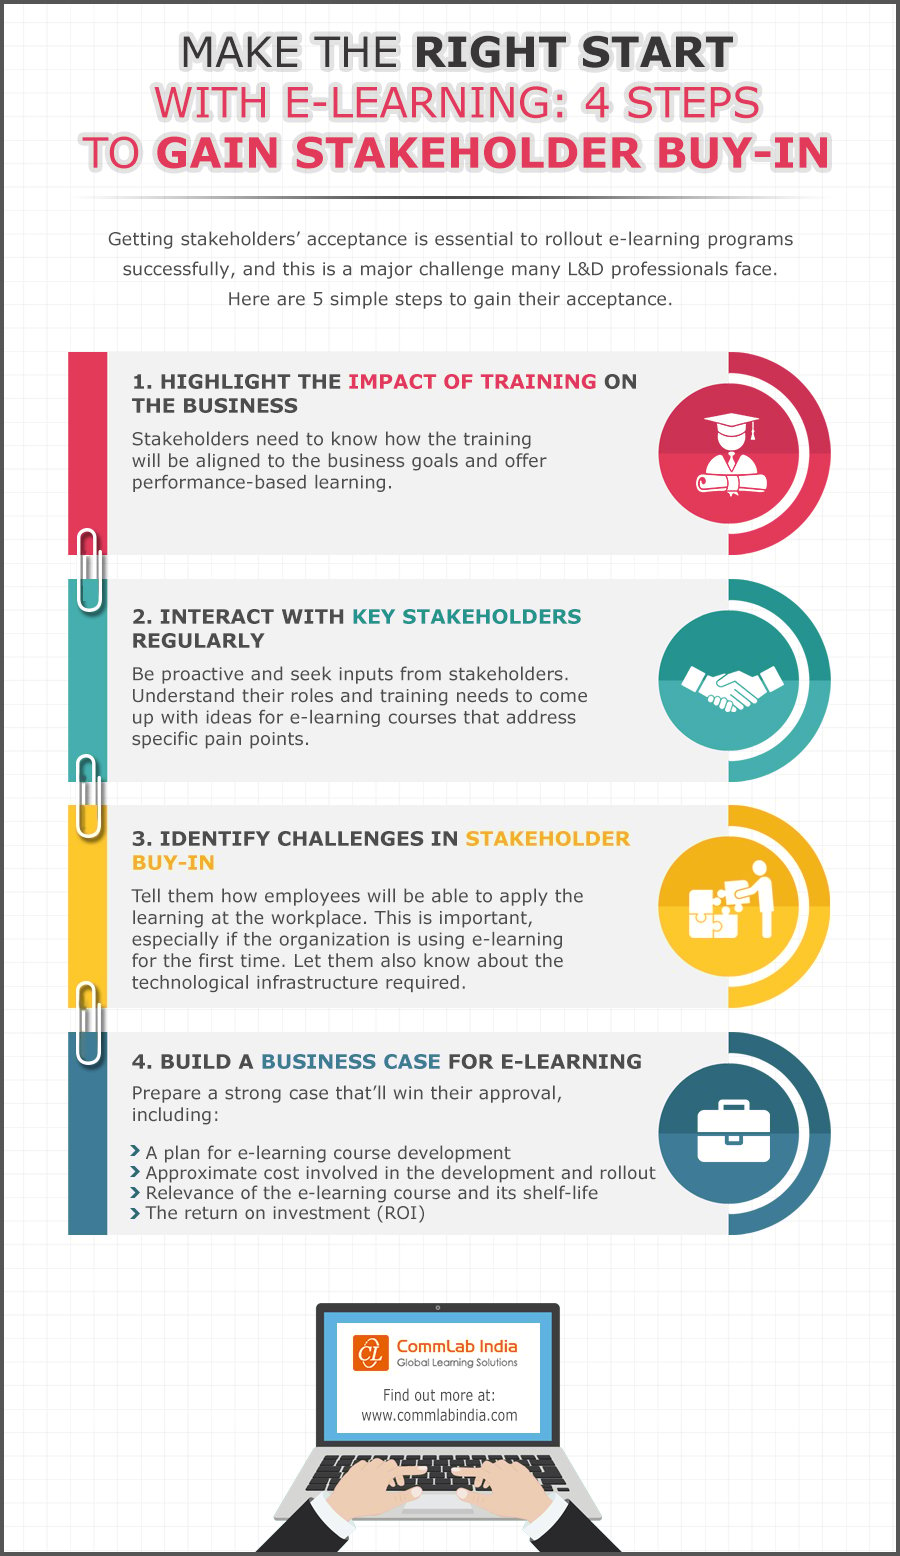 Make the Right Start with E-learning: 4 Steps to Gain Stakeholder Buy-in [Infographic]